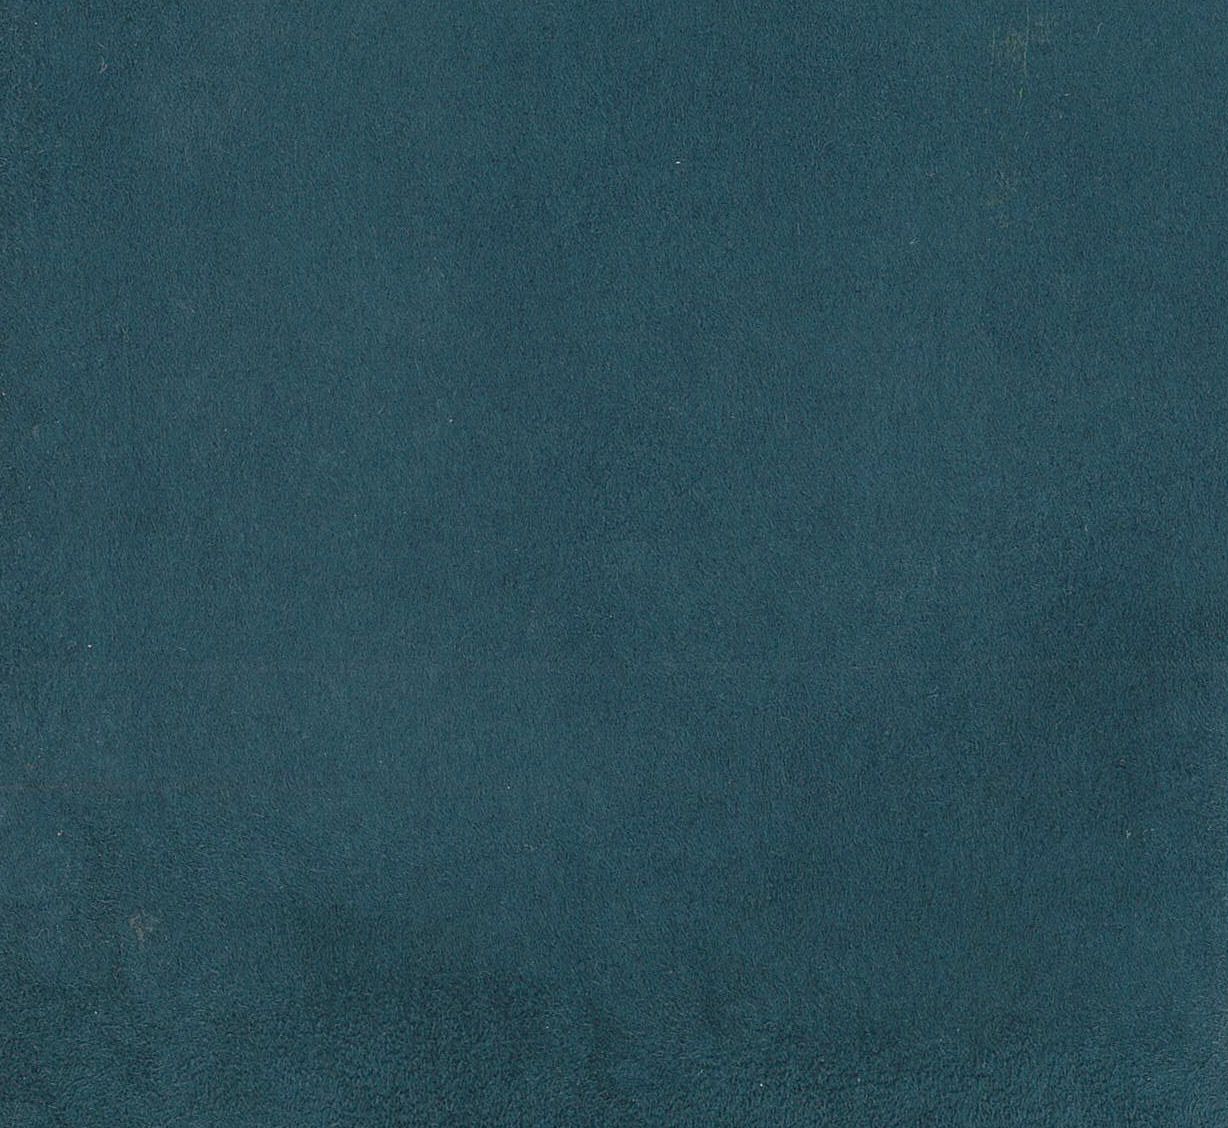 Sarabelle Suede fabric in teal color - pattern number H6 0016SARA - by Scalamandre in the Old World Weavers collection